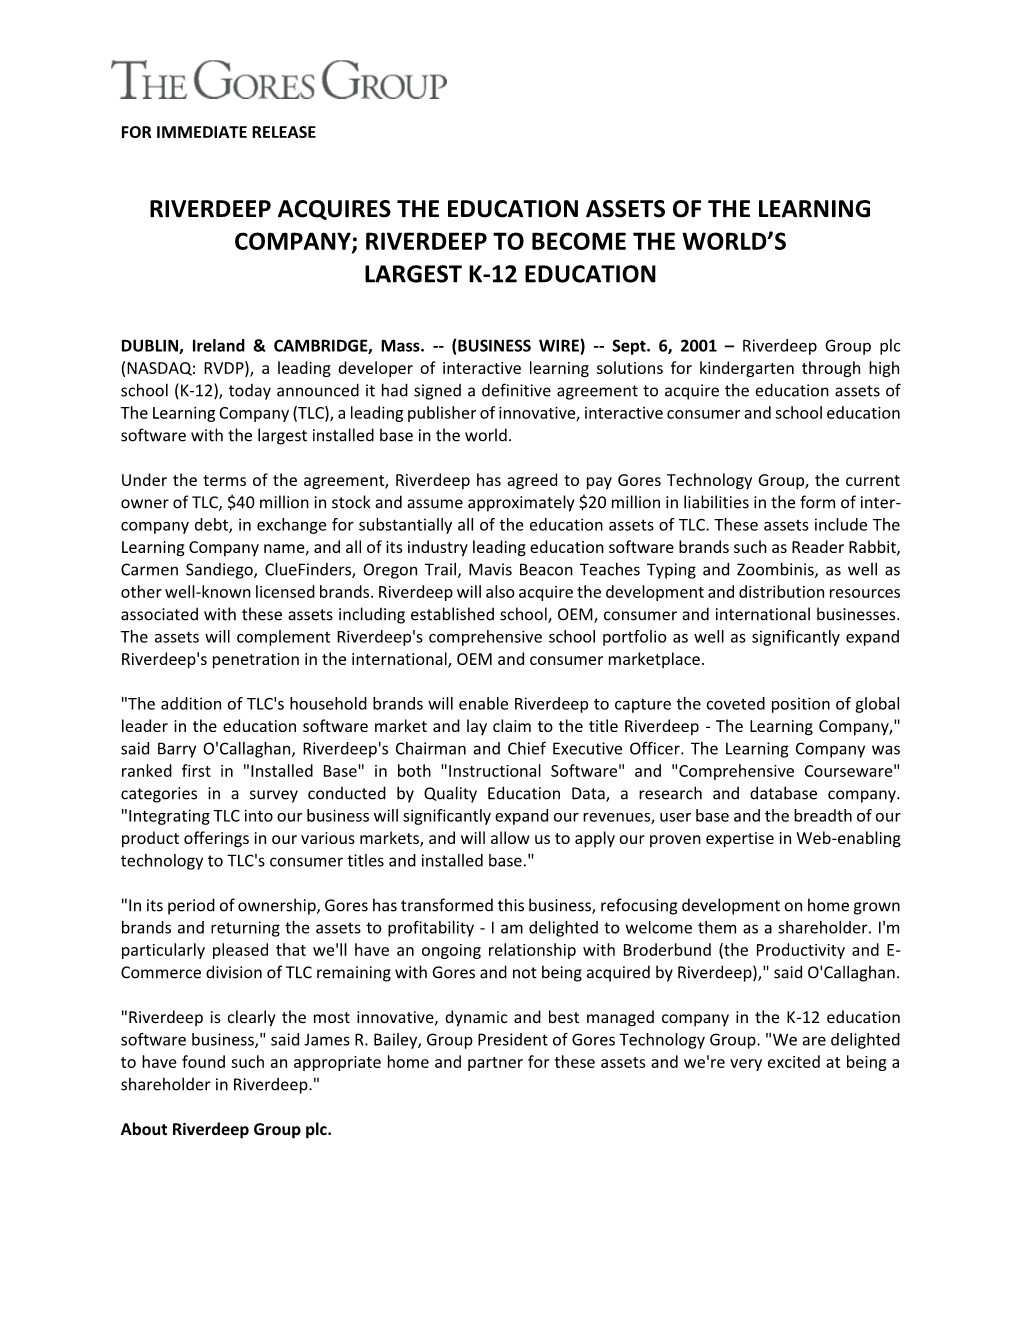 Riverdeep Acquires the Education Assets of the Learning Company; Riverdeep to Become the World’S Largest K-12 Education